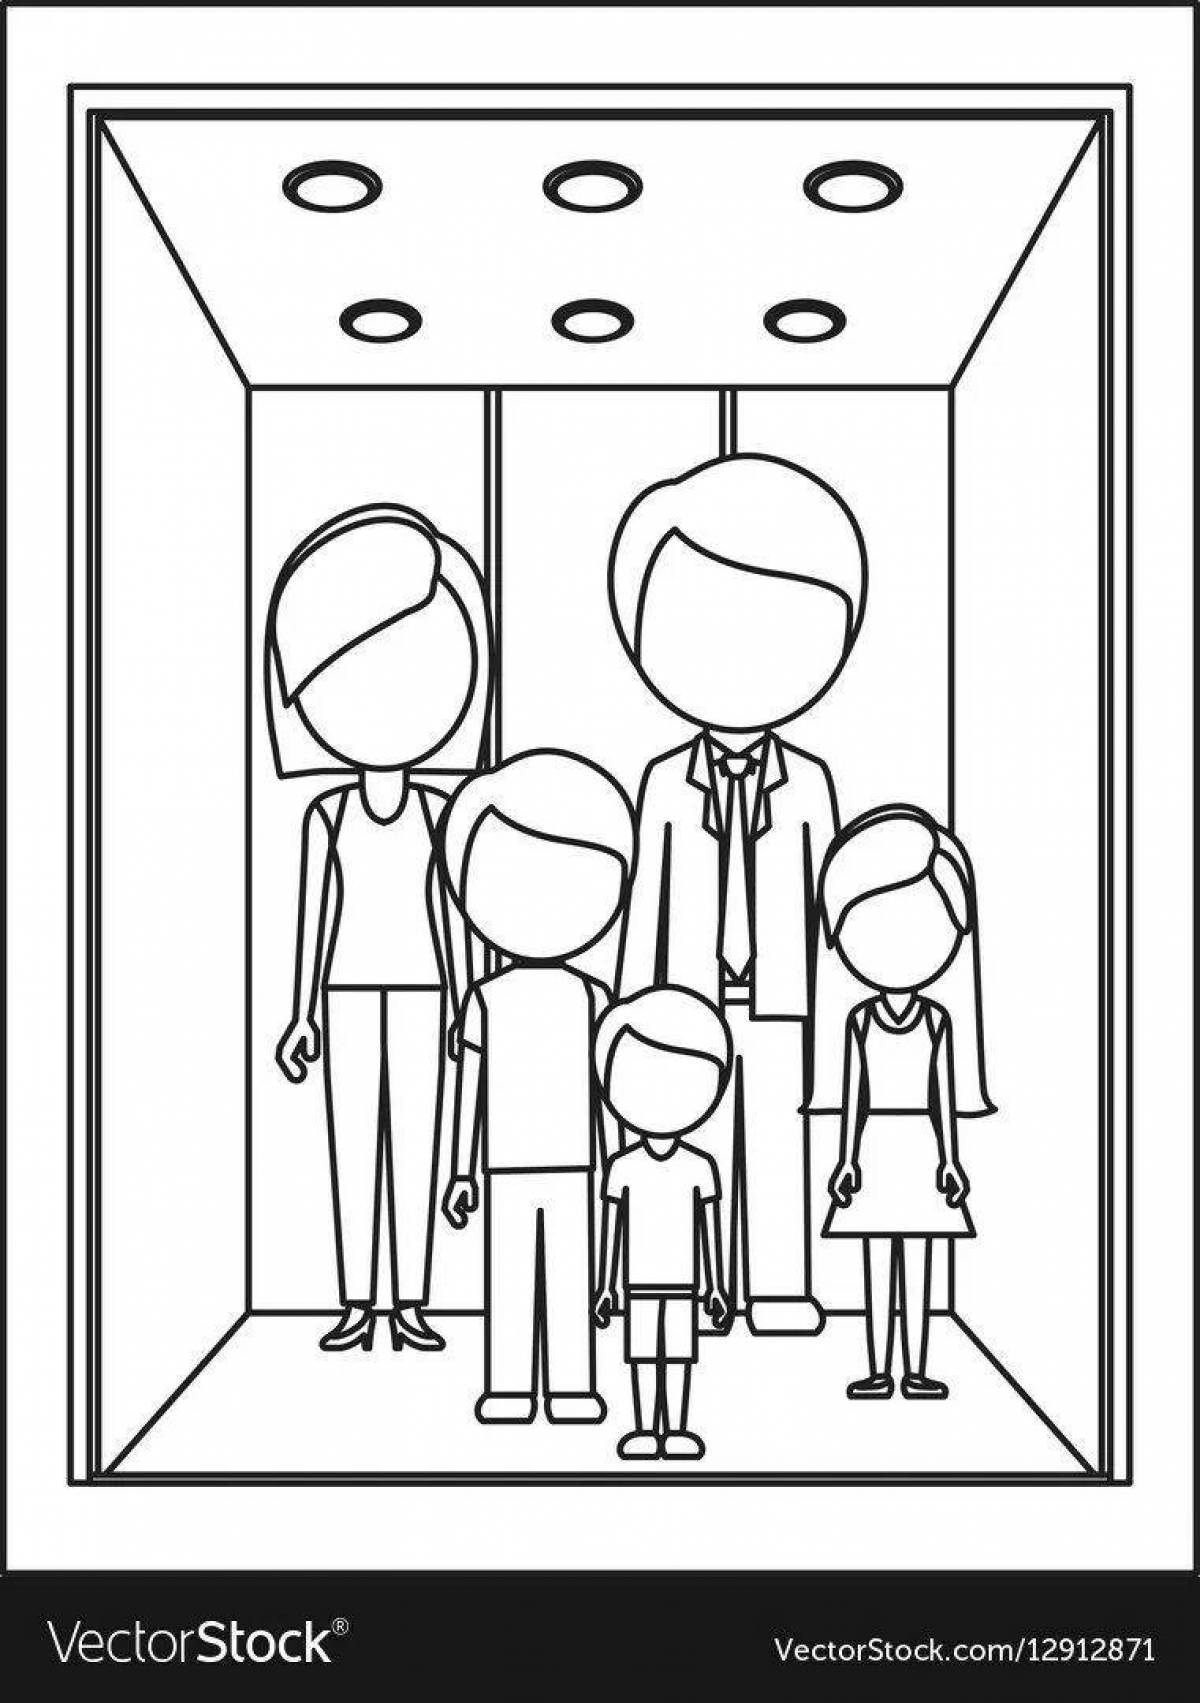 Animated elevator coloring page for kids